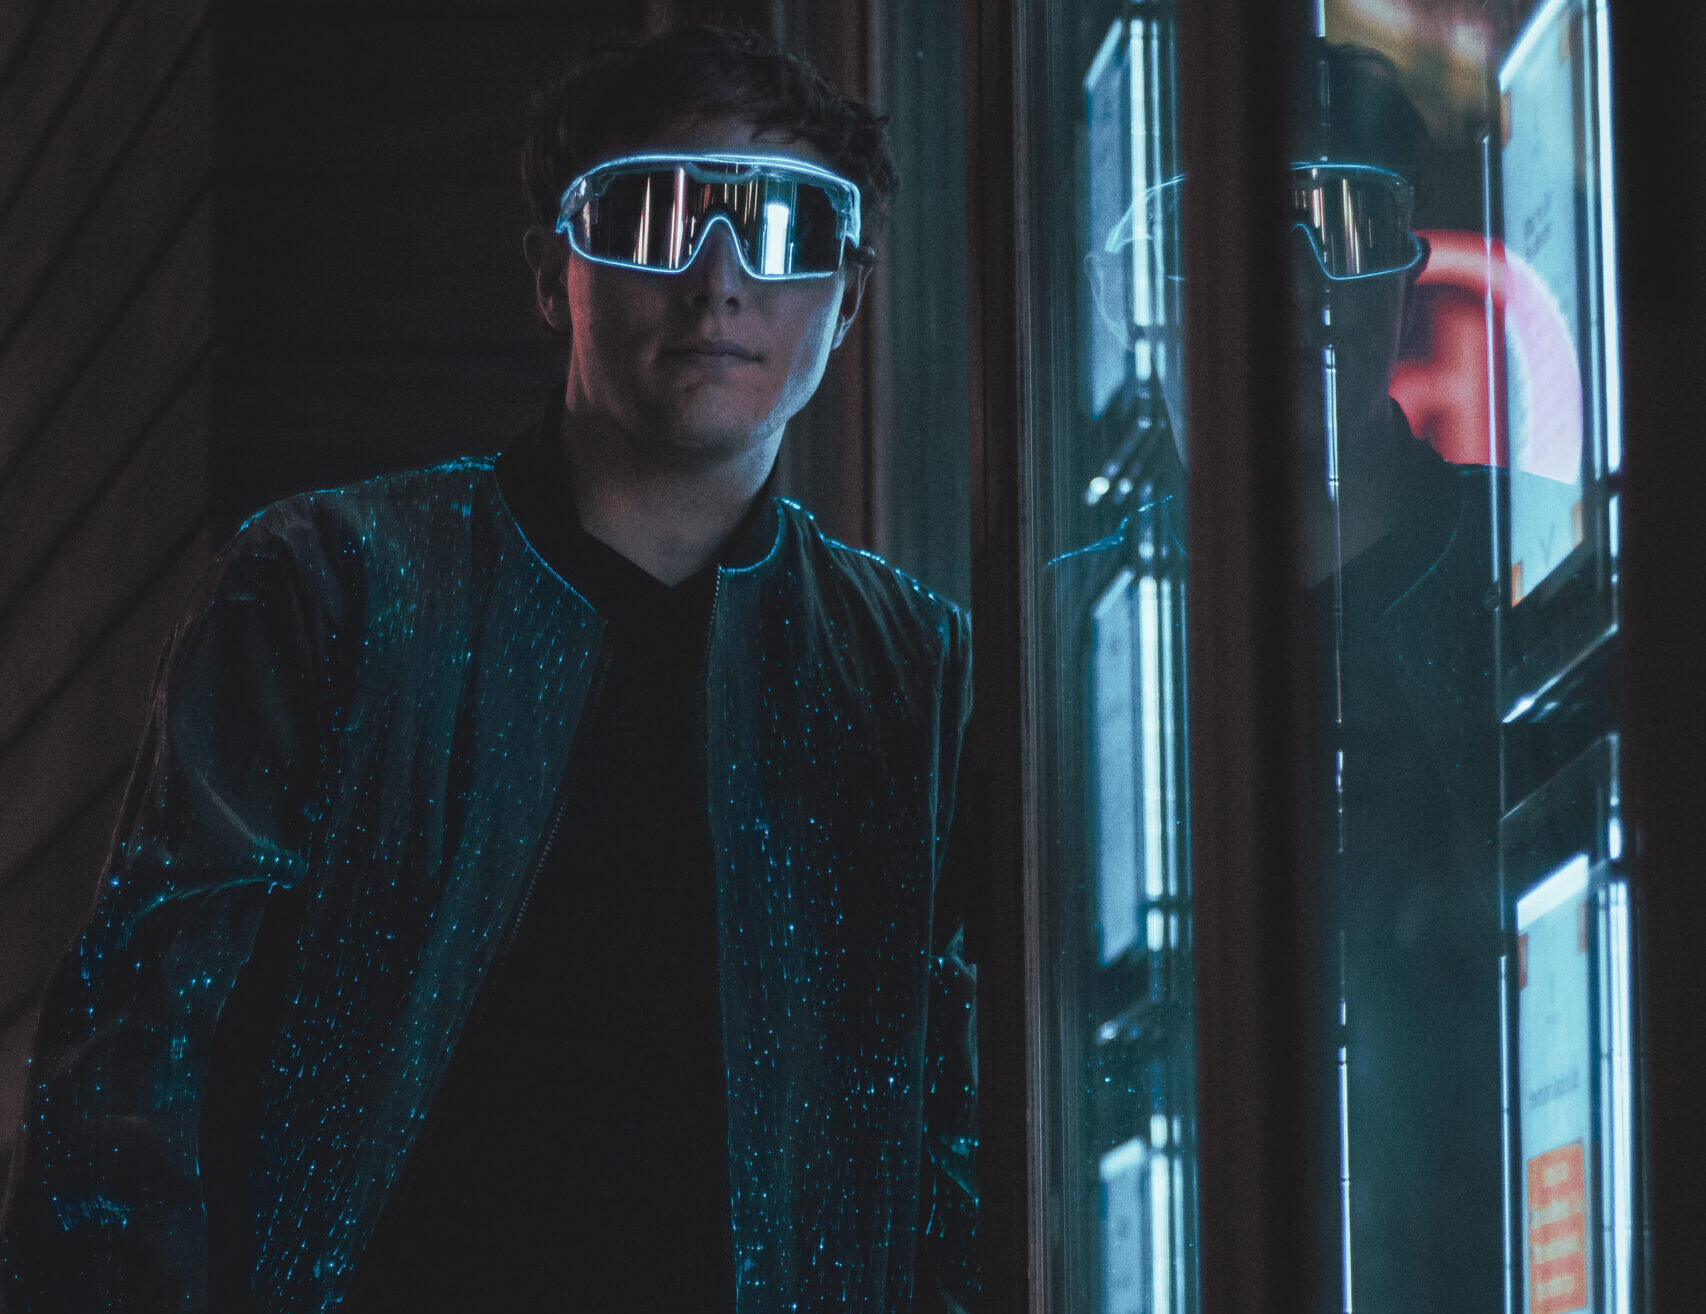 RL Grime & NERO’s ‘Renegade’ Gets a Futuristic Dubstep Makeover by Cyazon